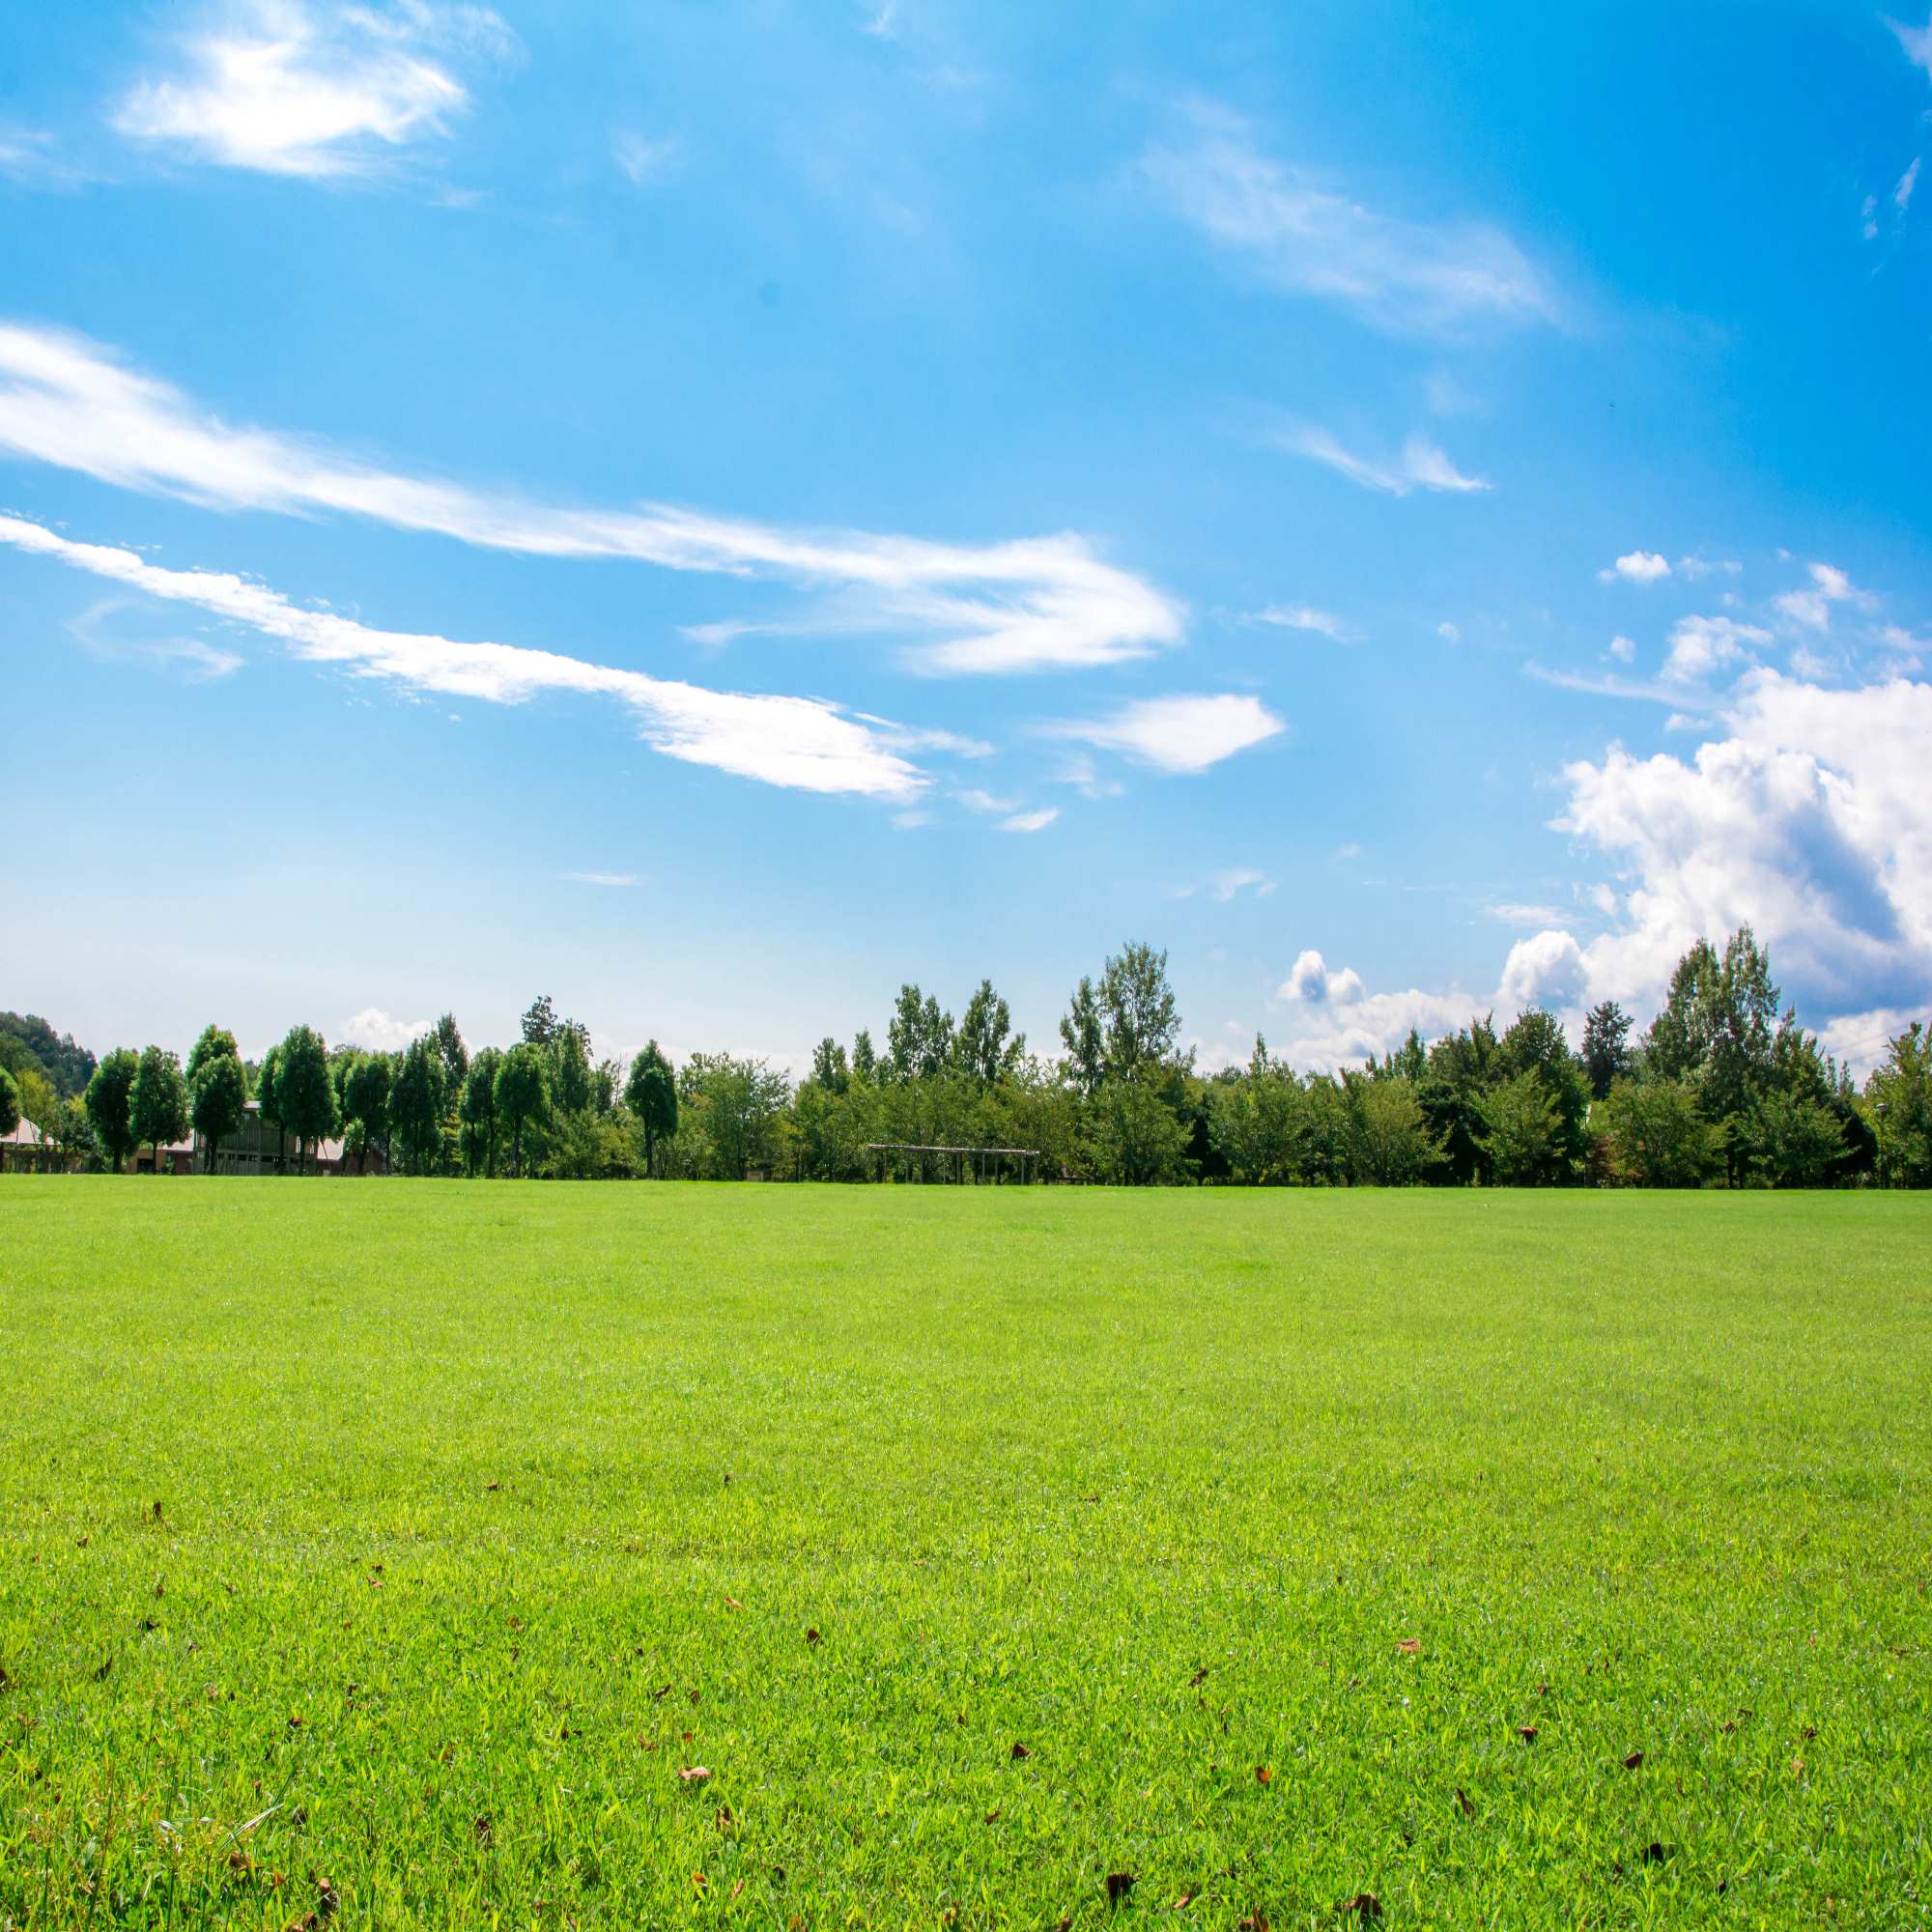 An empty grassy field with trees in the distances and a blue sky with clouds